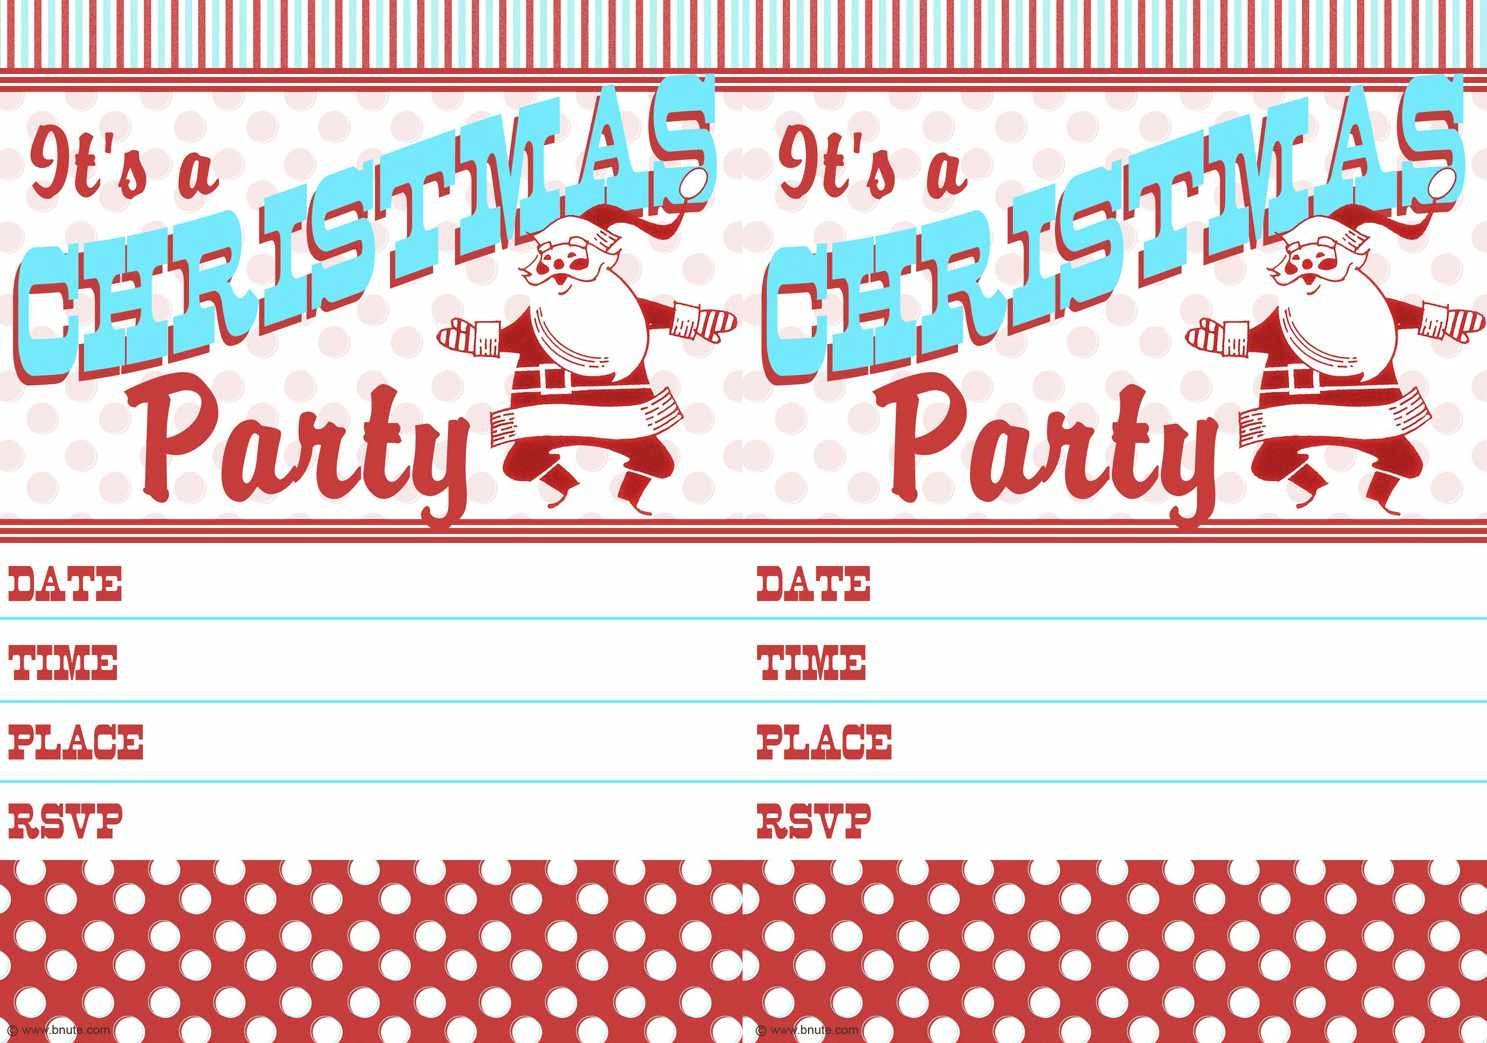 Bring A Bottle Party Invitation 10 Free Christmas Party